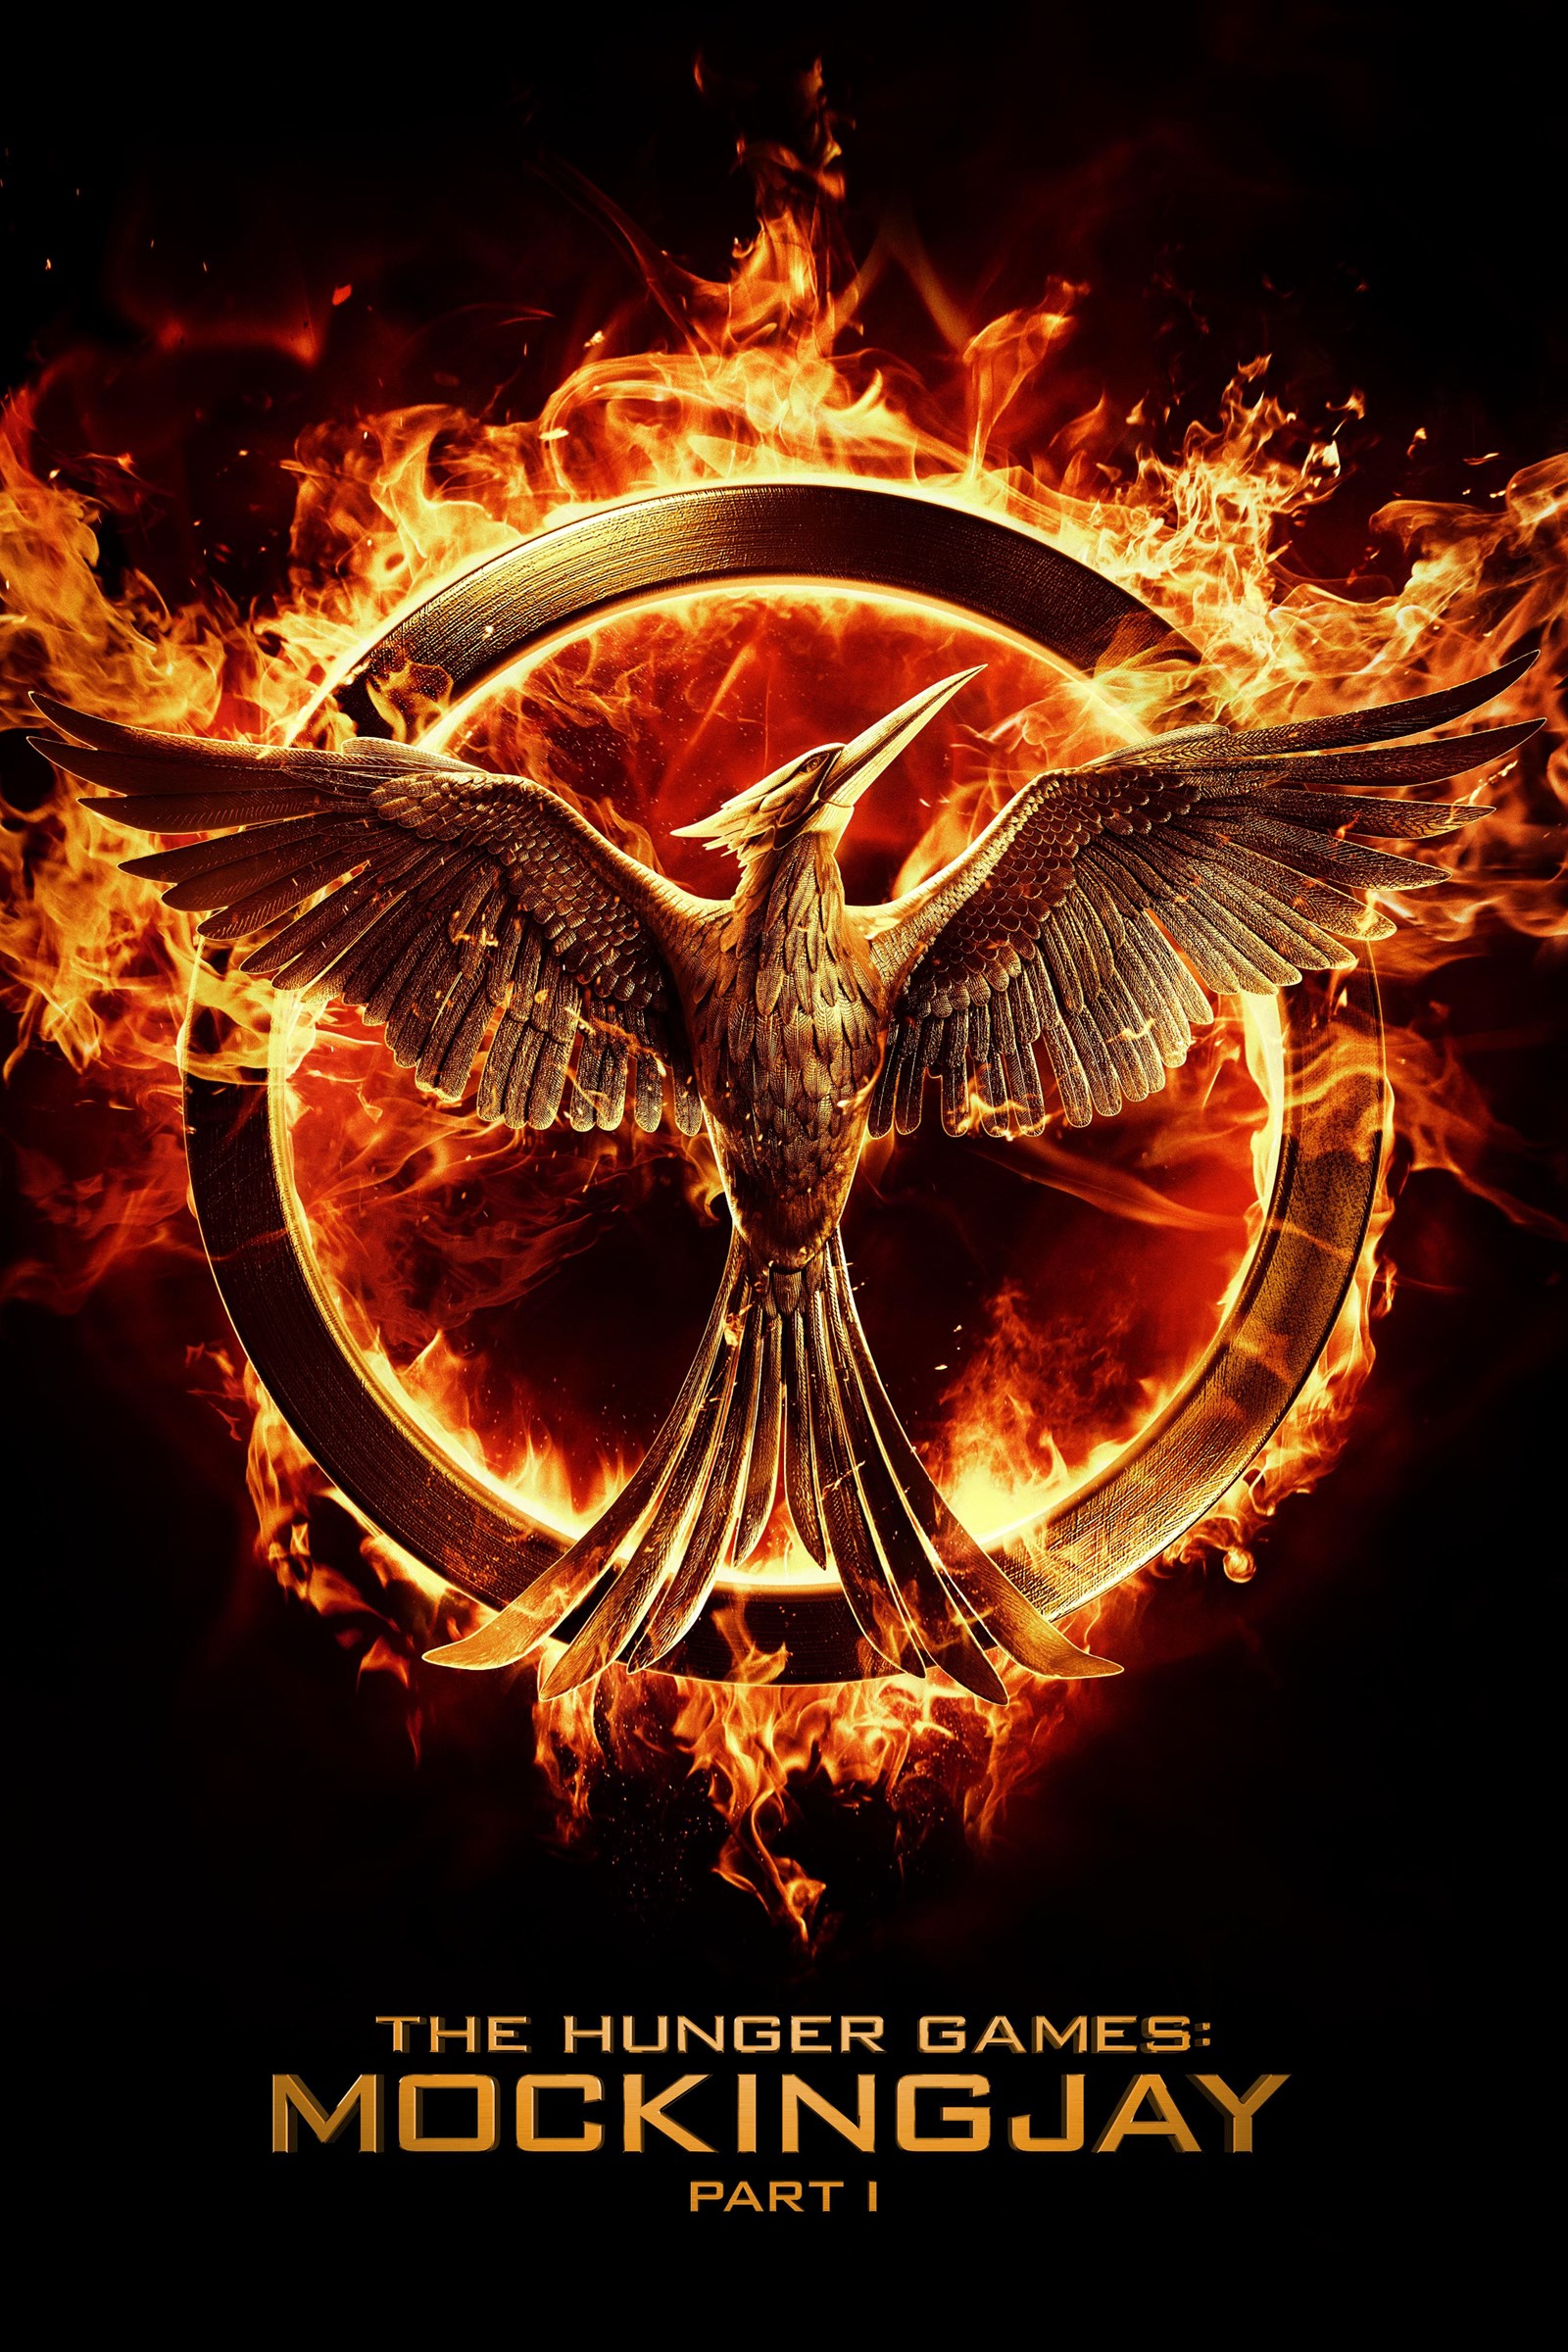 The hunger games: mockingjay - part 1 2014